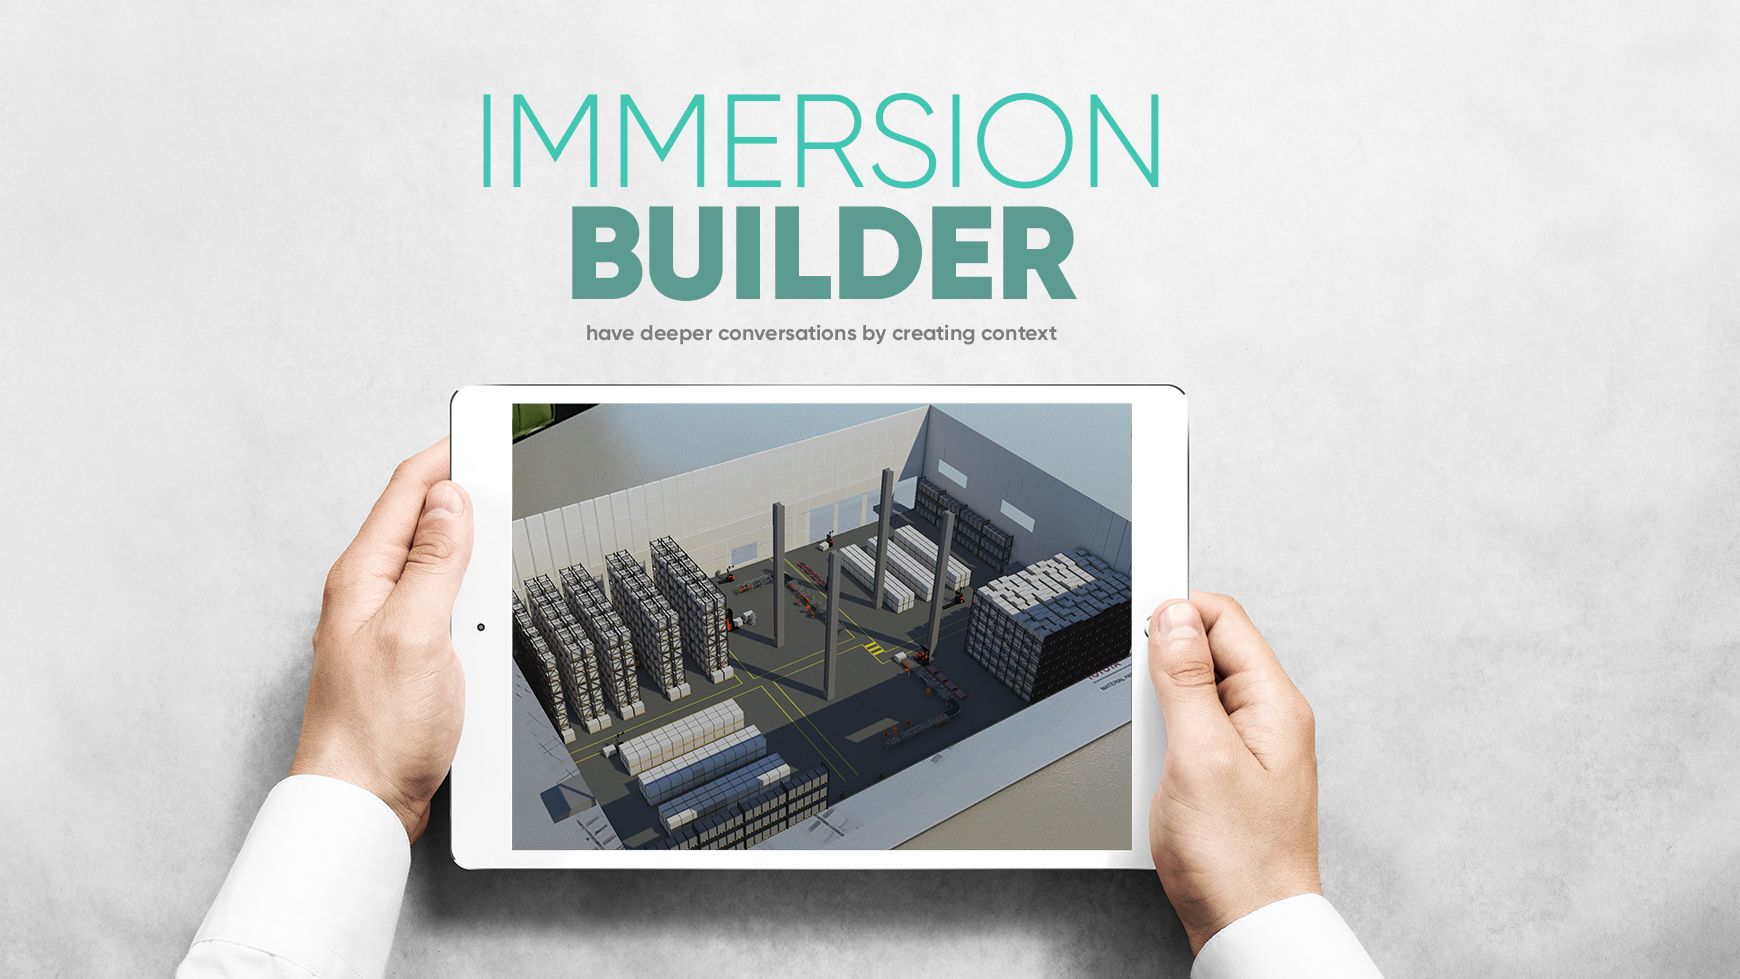 Immersion Builder - Making the conversation visual